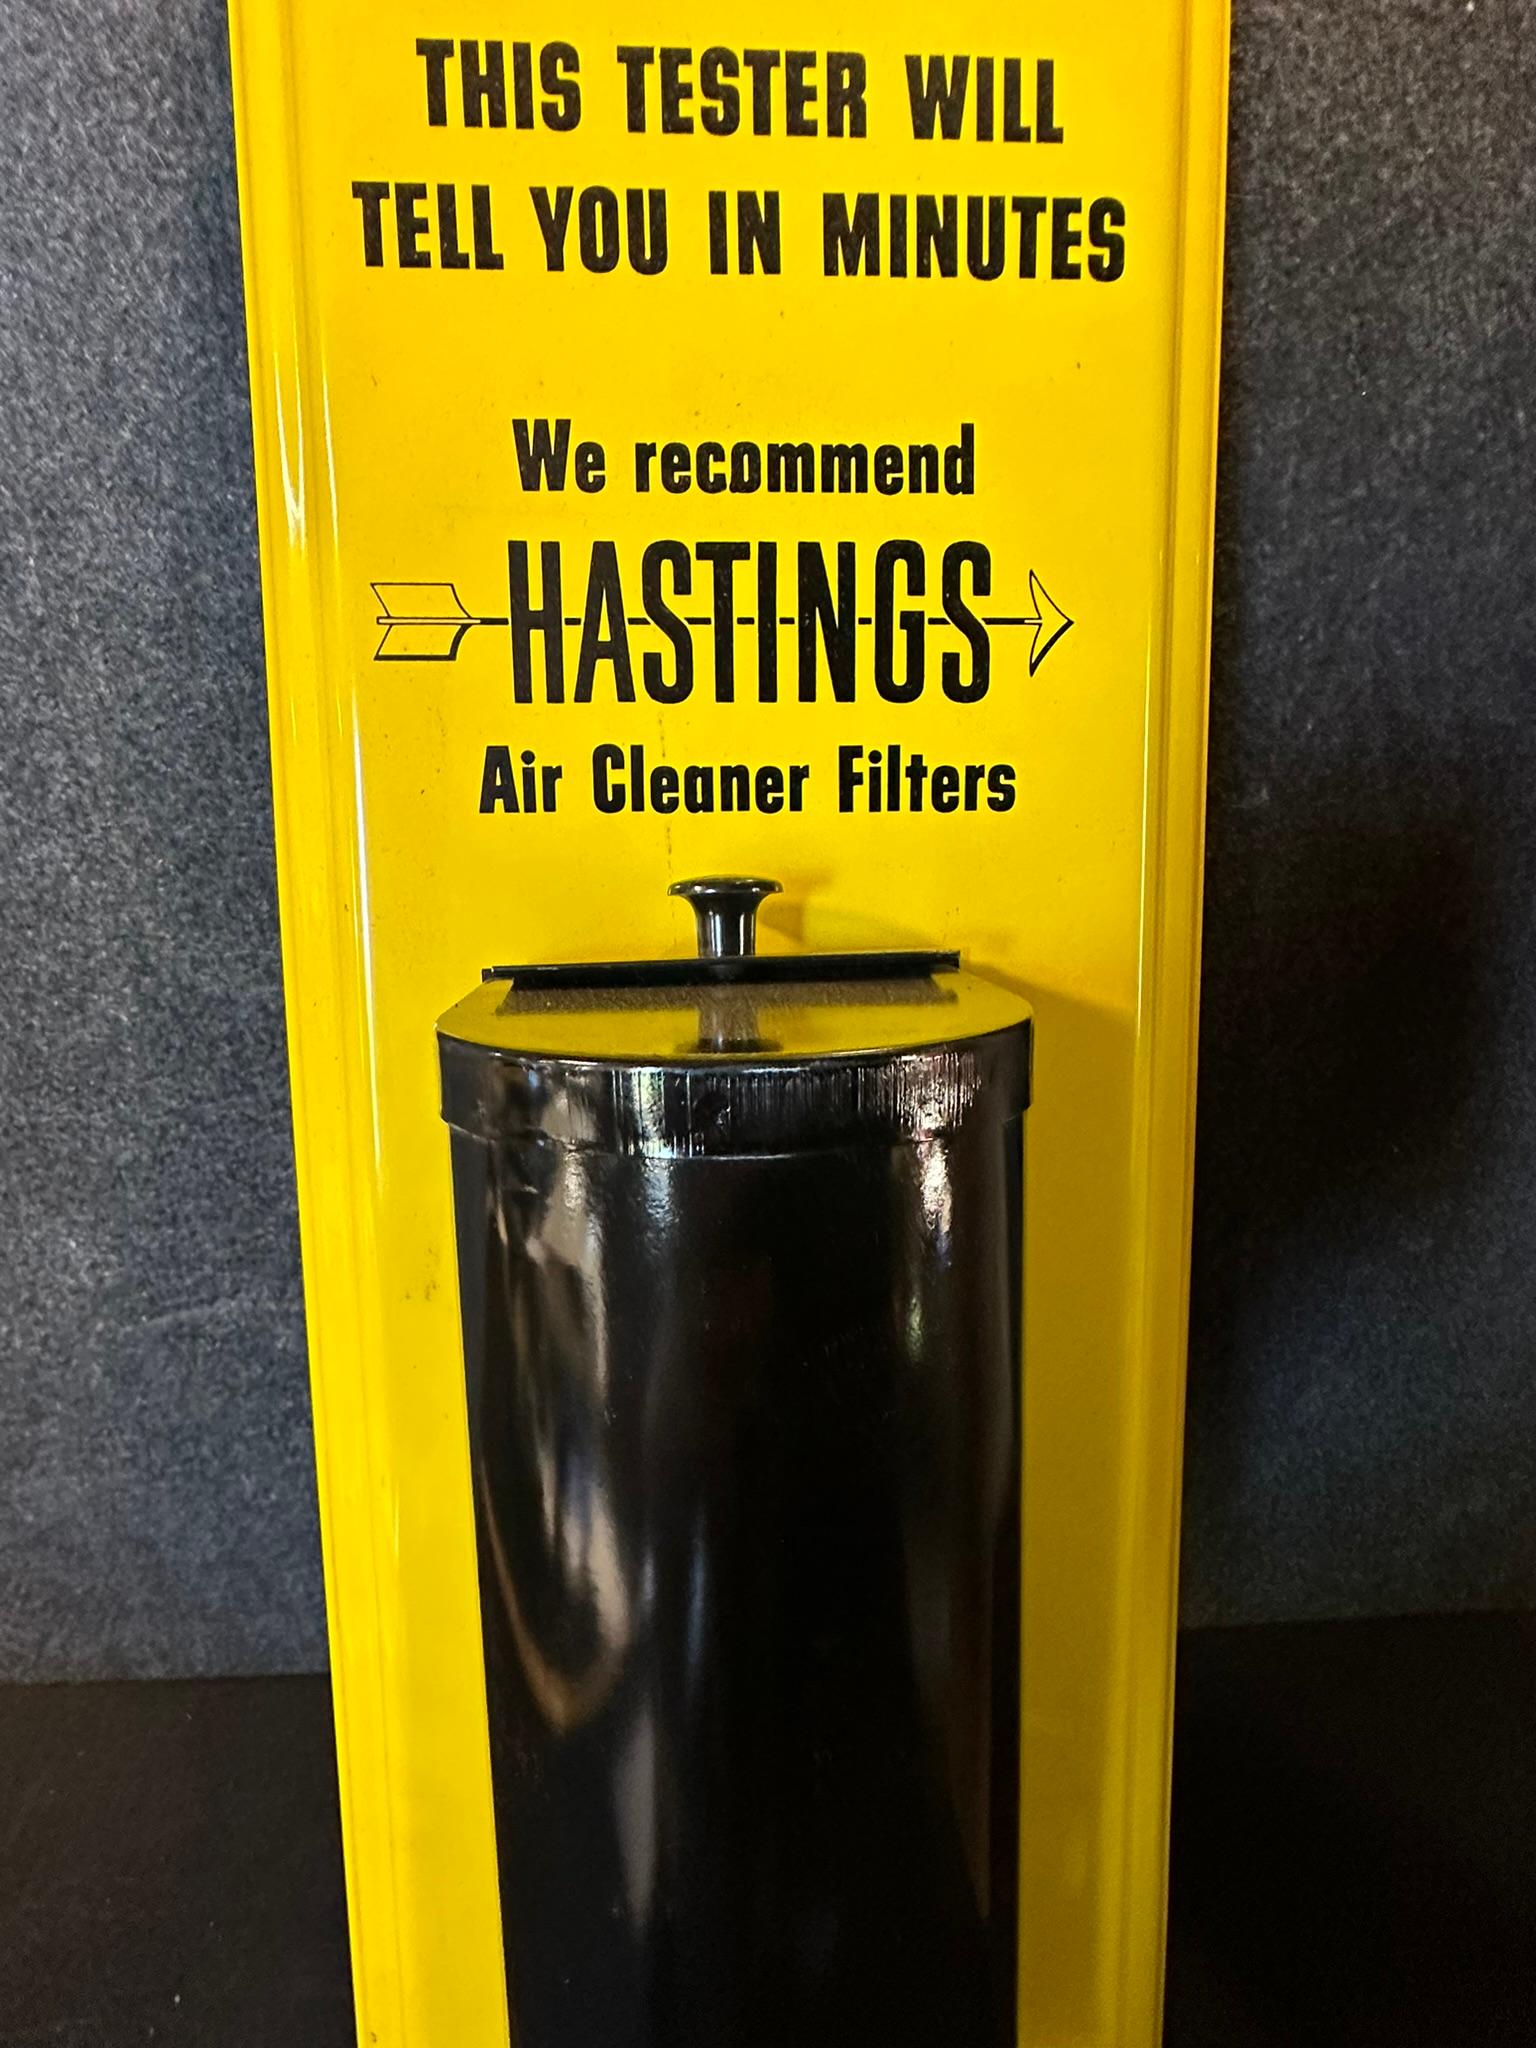 Rare NOS 1950s Hastings Air Cleaner Tester Lighted Advertising Store Display w/ Original Shipping Bo